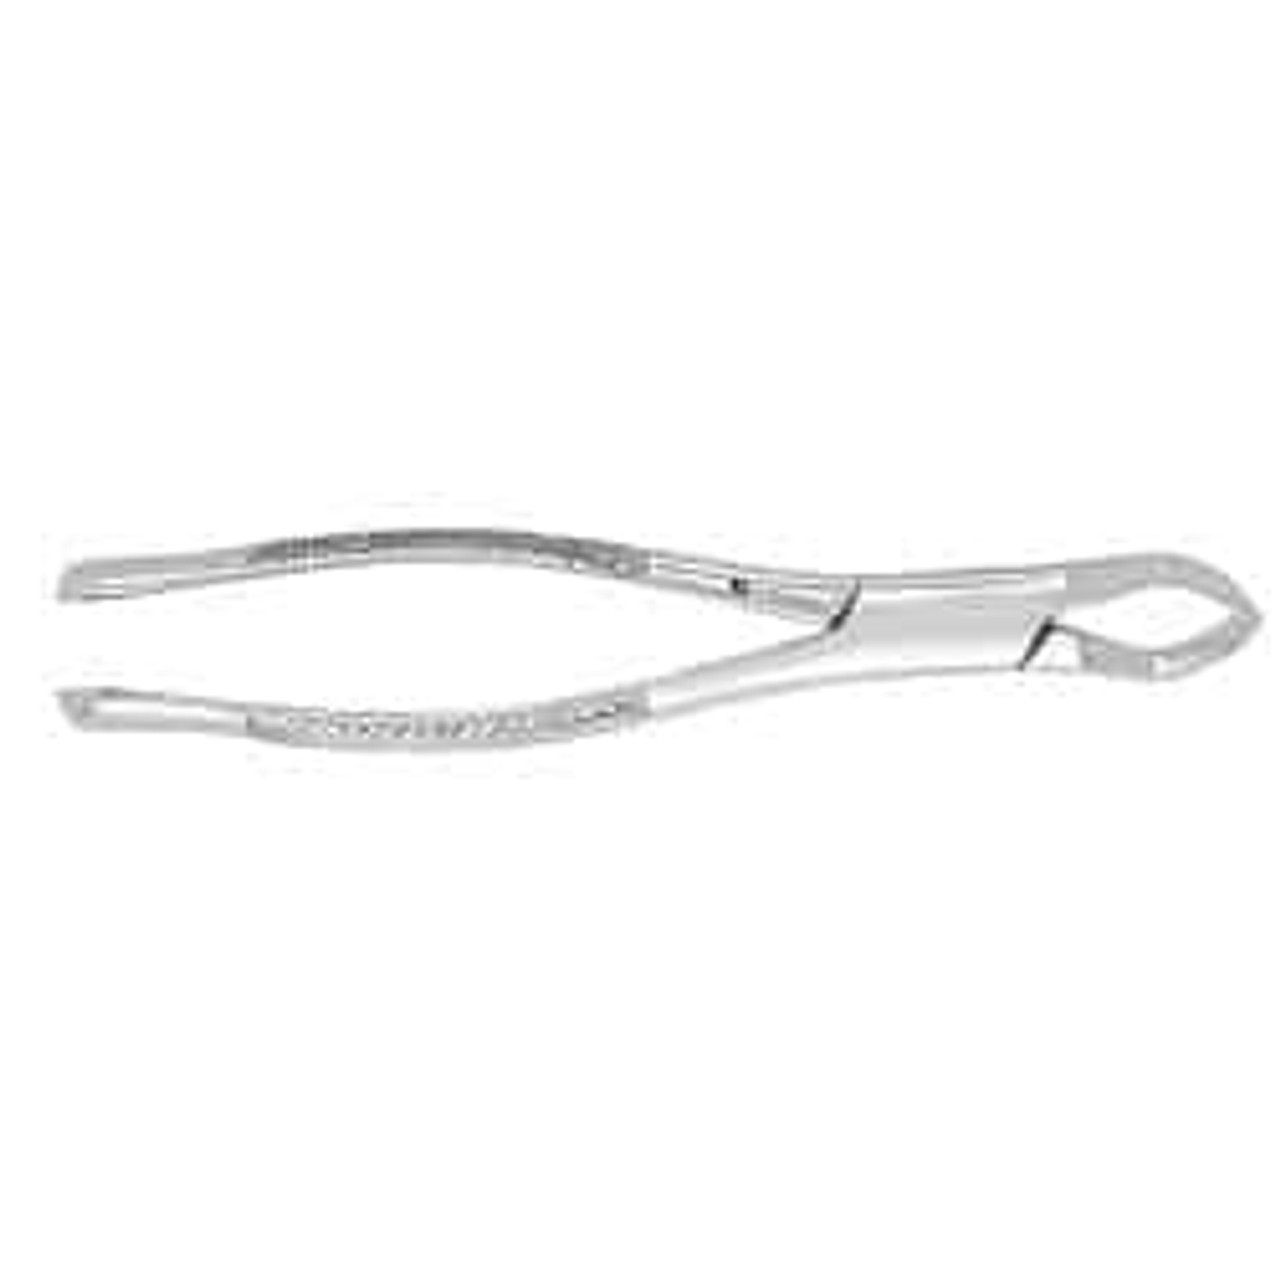 J & J Instruments - EXTRACTING FORCEPS #17